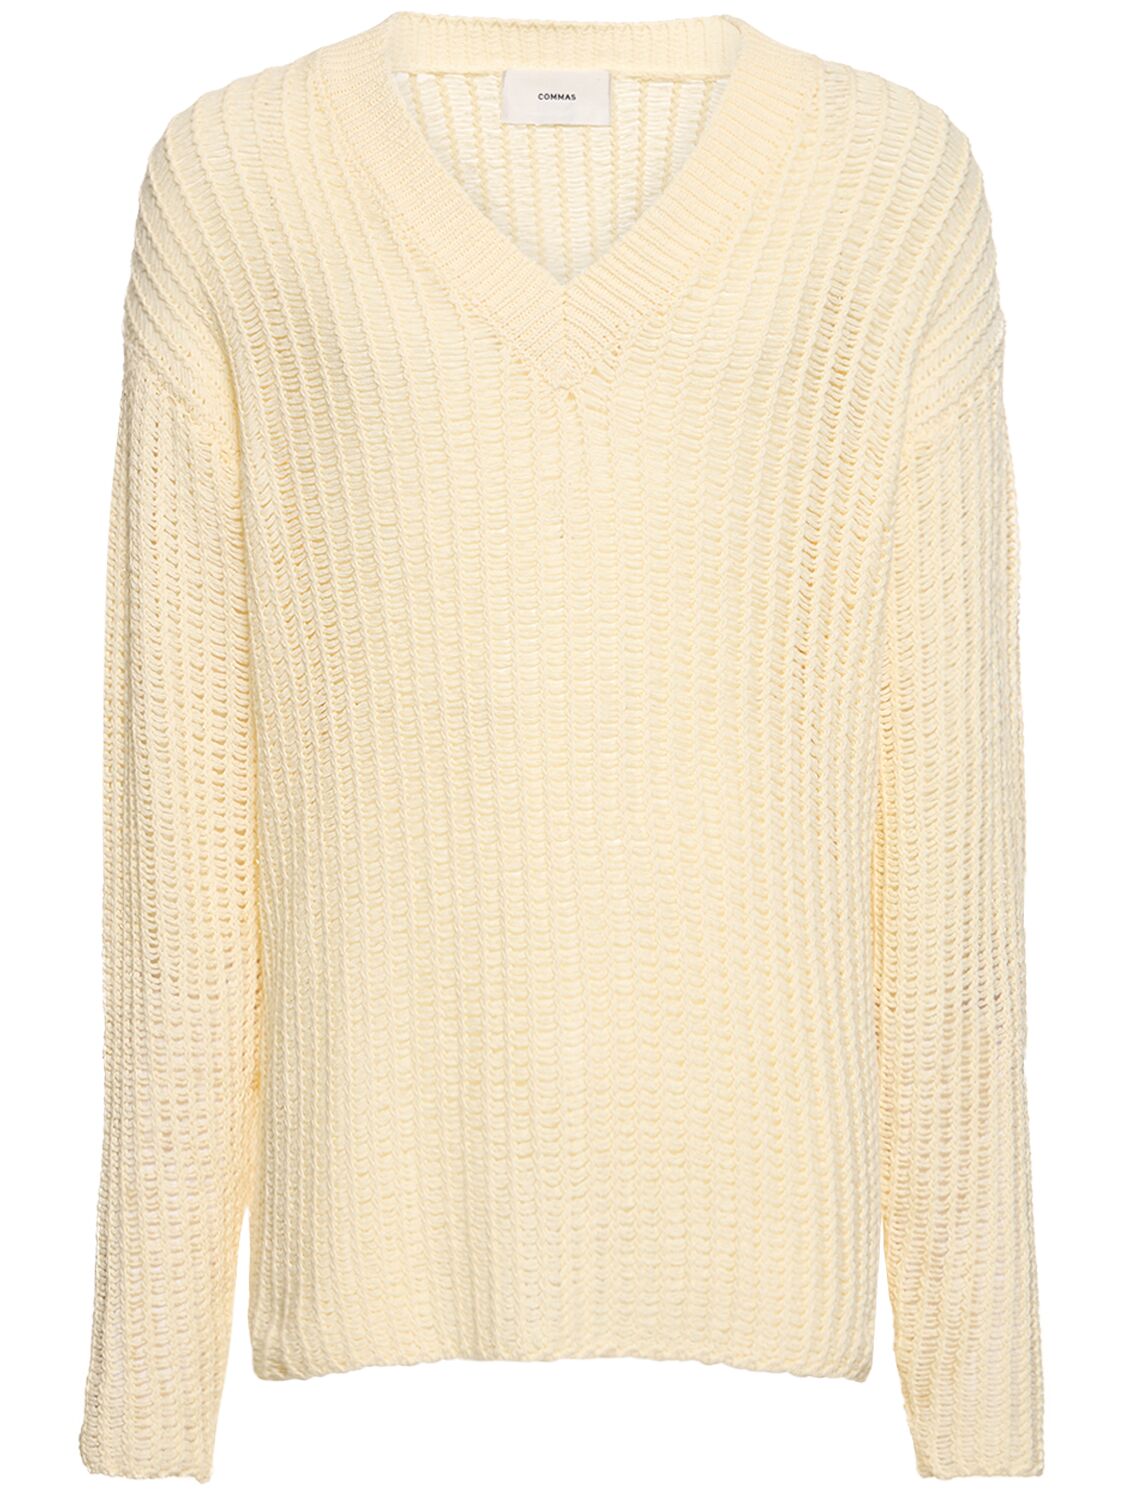 Commas Relaxed Fit V-neck Knit Sweater In Off-white